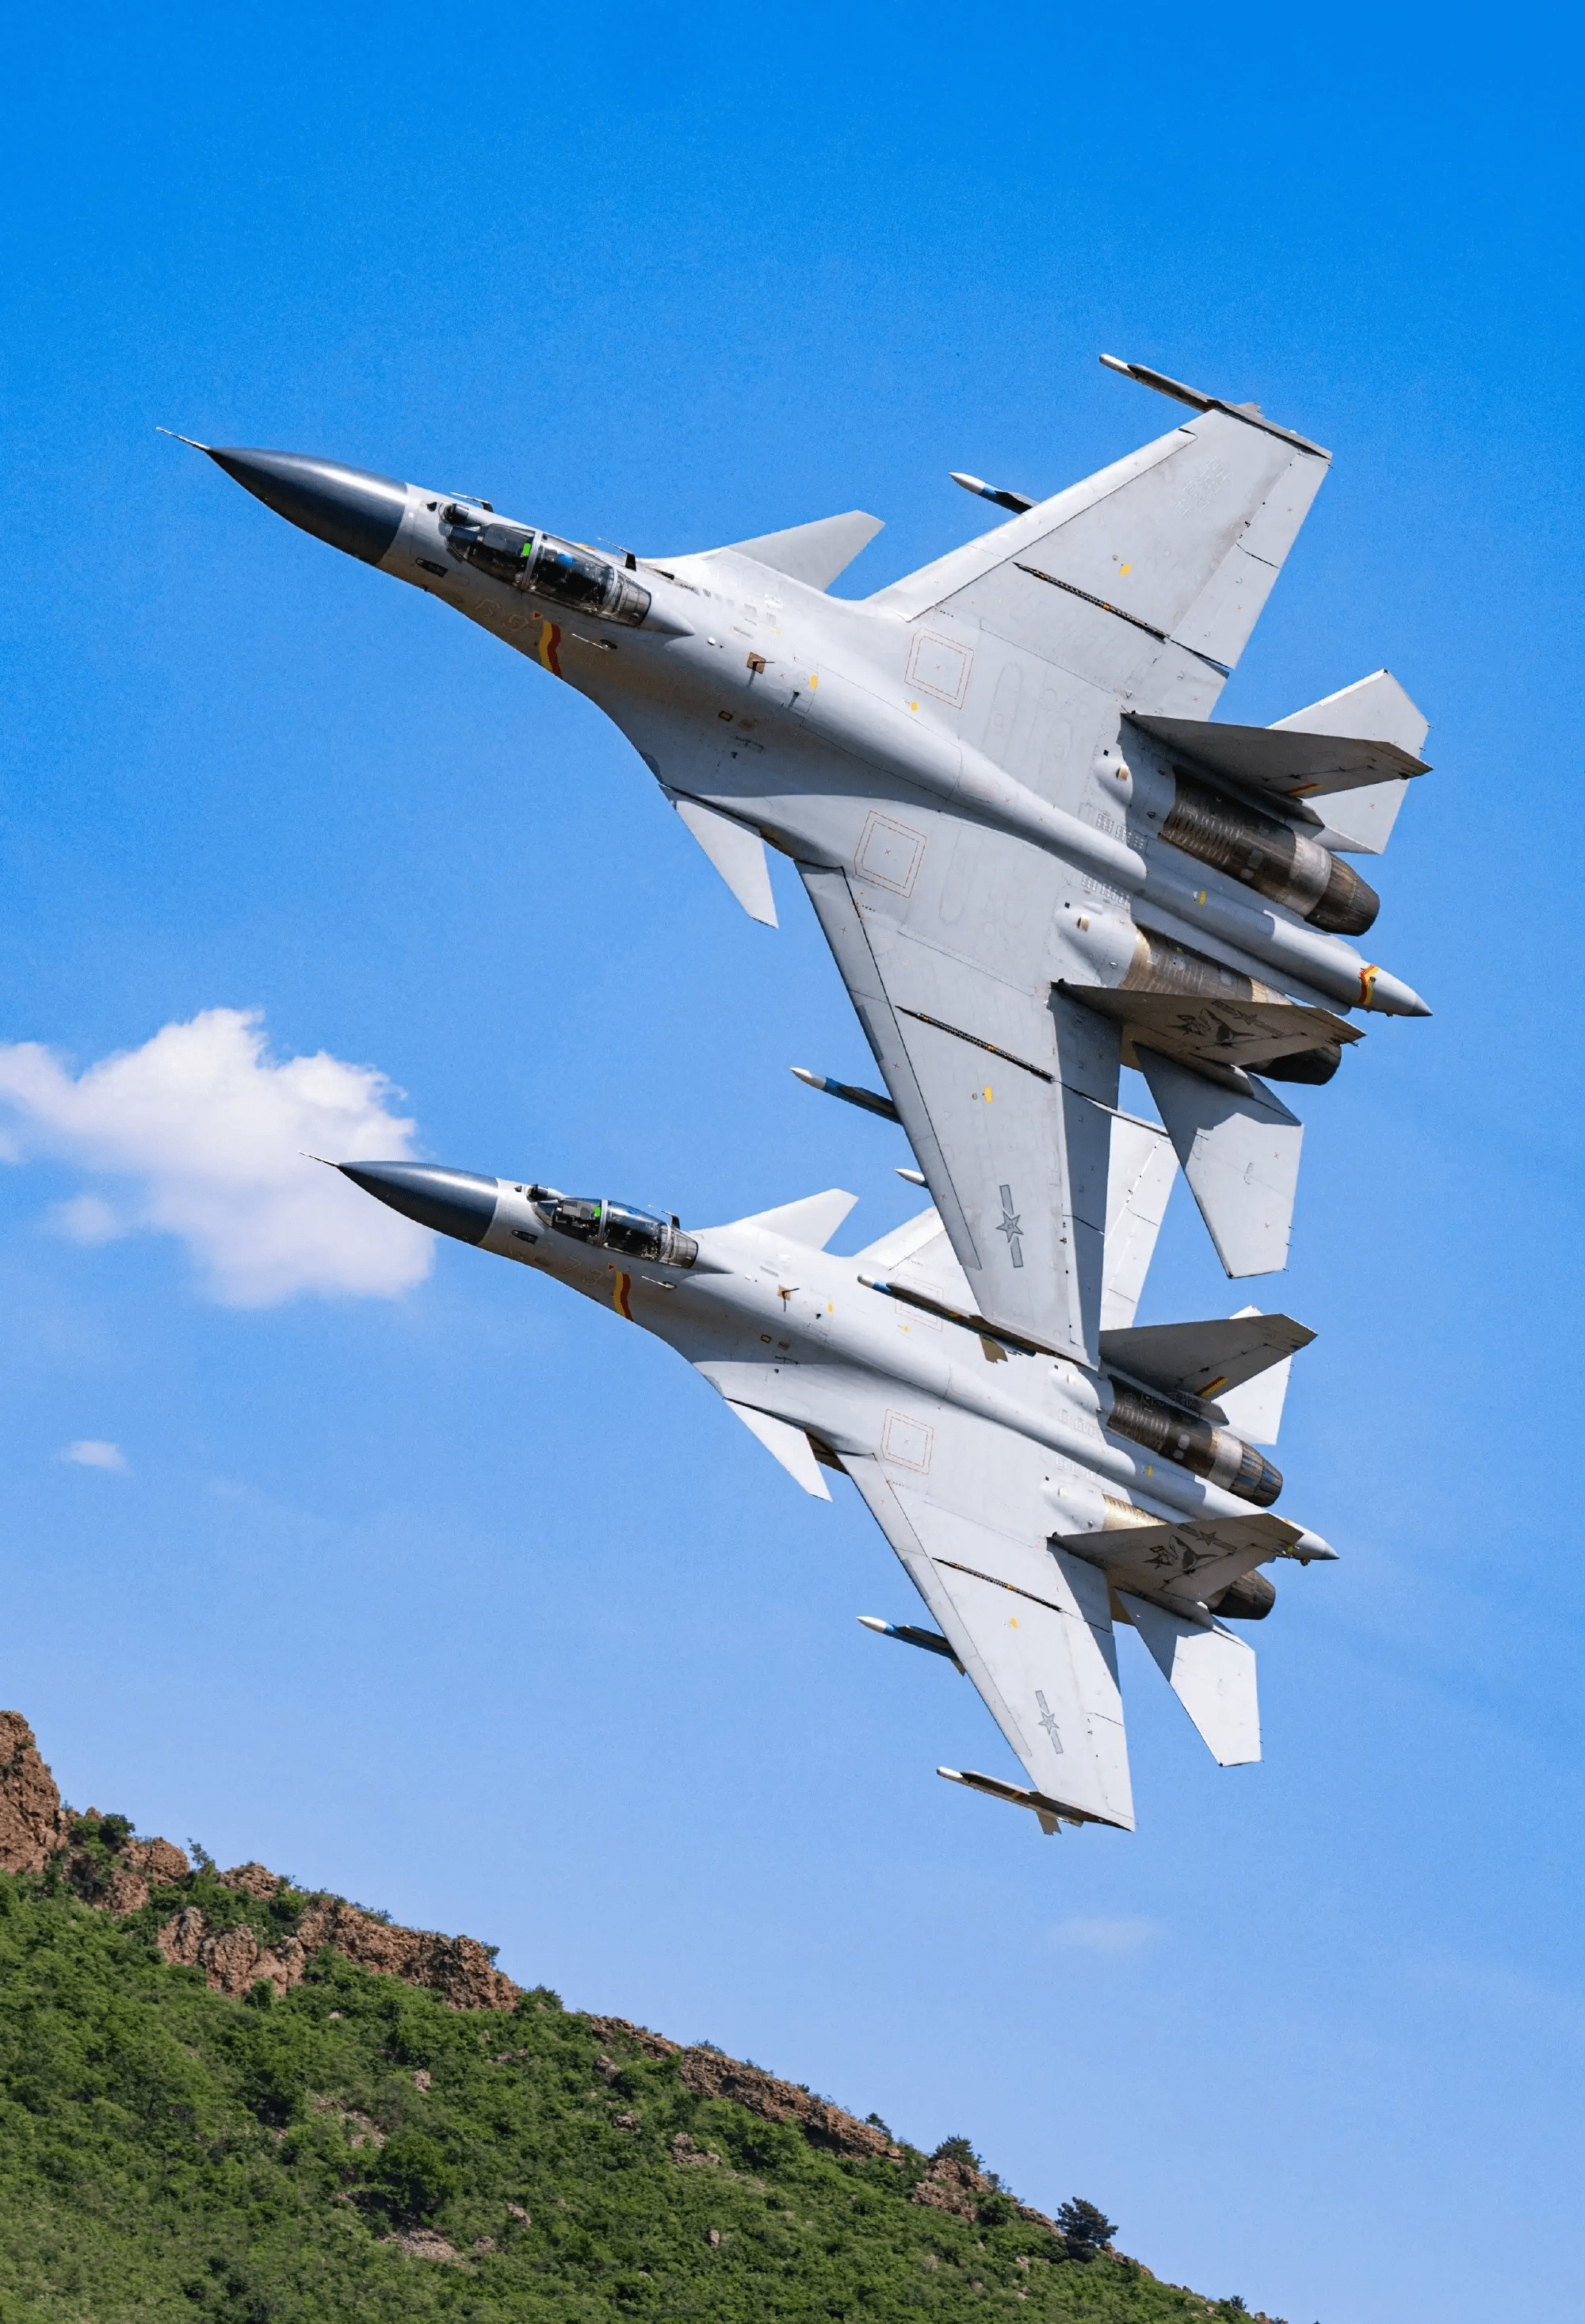 General 2000x2932 People's Liberation Army Navy J-15 portrait display military aircraft missiles military vehicle military pilot clouds sky flying